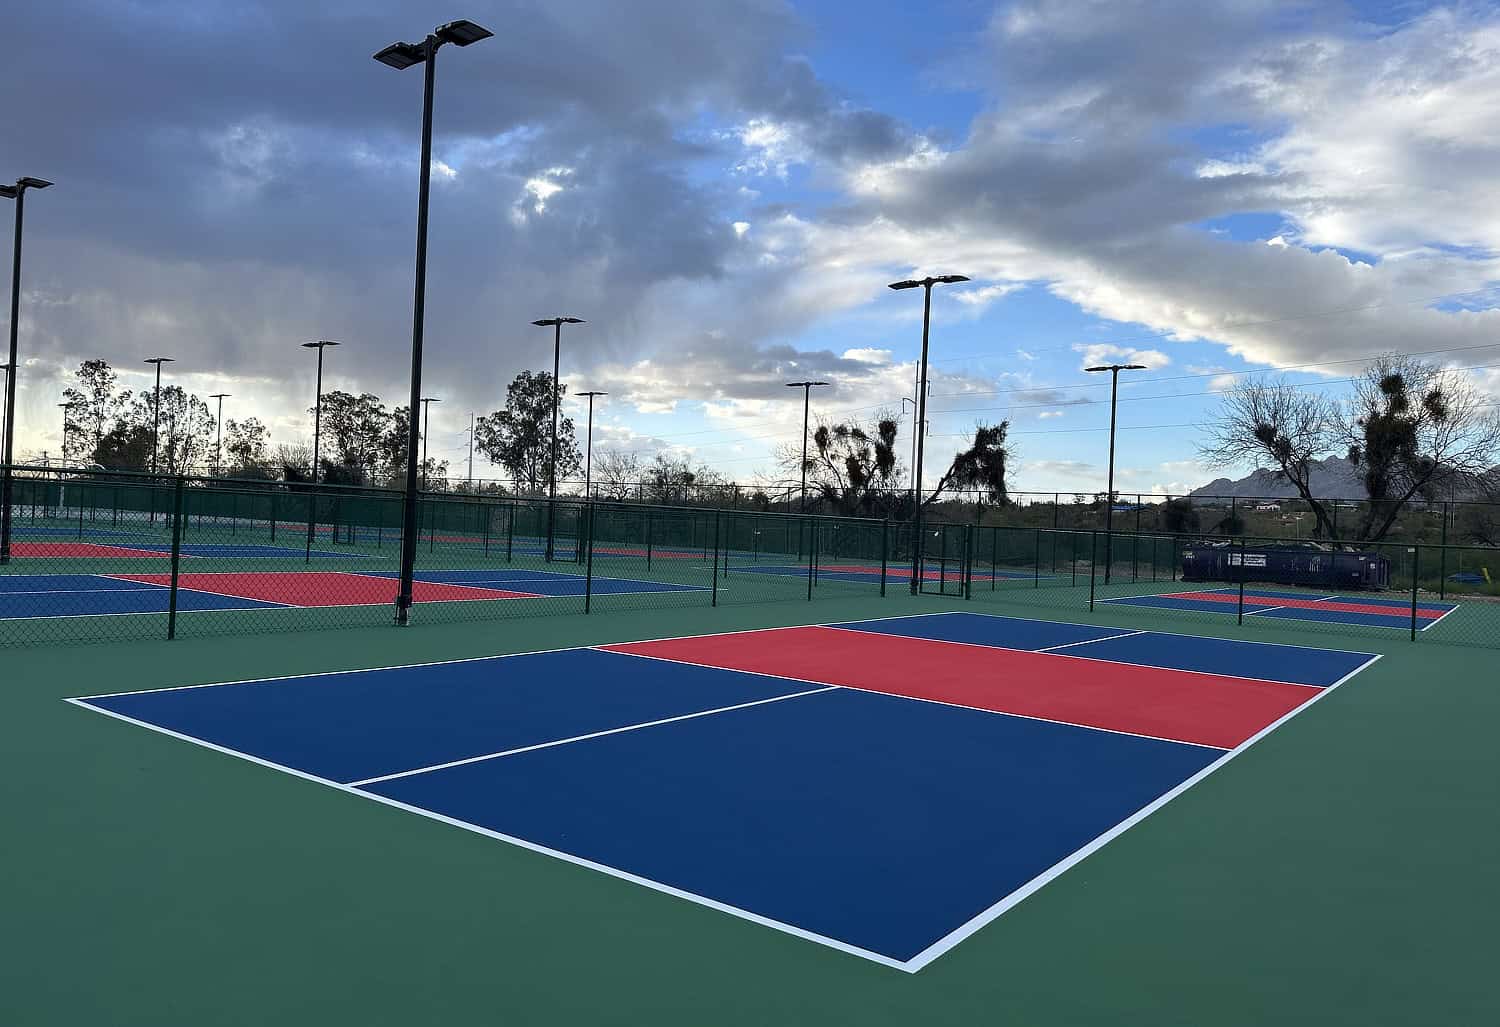 New Pickleball Courts Tucson Racquet Fitness Club | Tucson Racquet & Fitness Club - Tennis, Pickleball, Fitness, More!